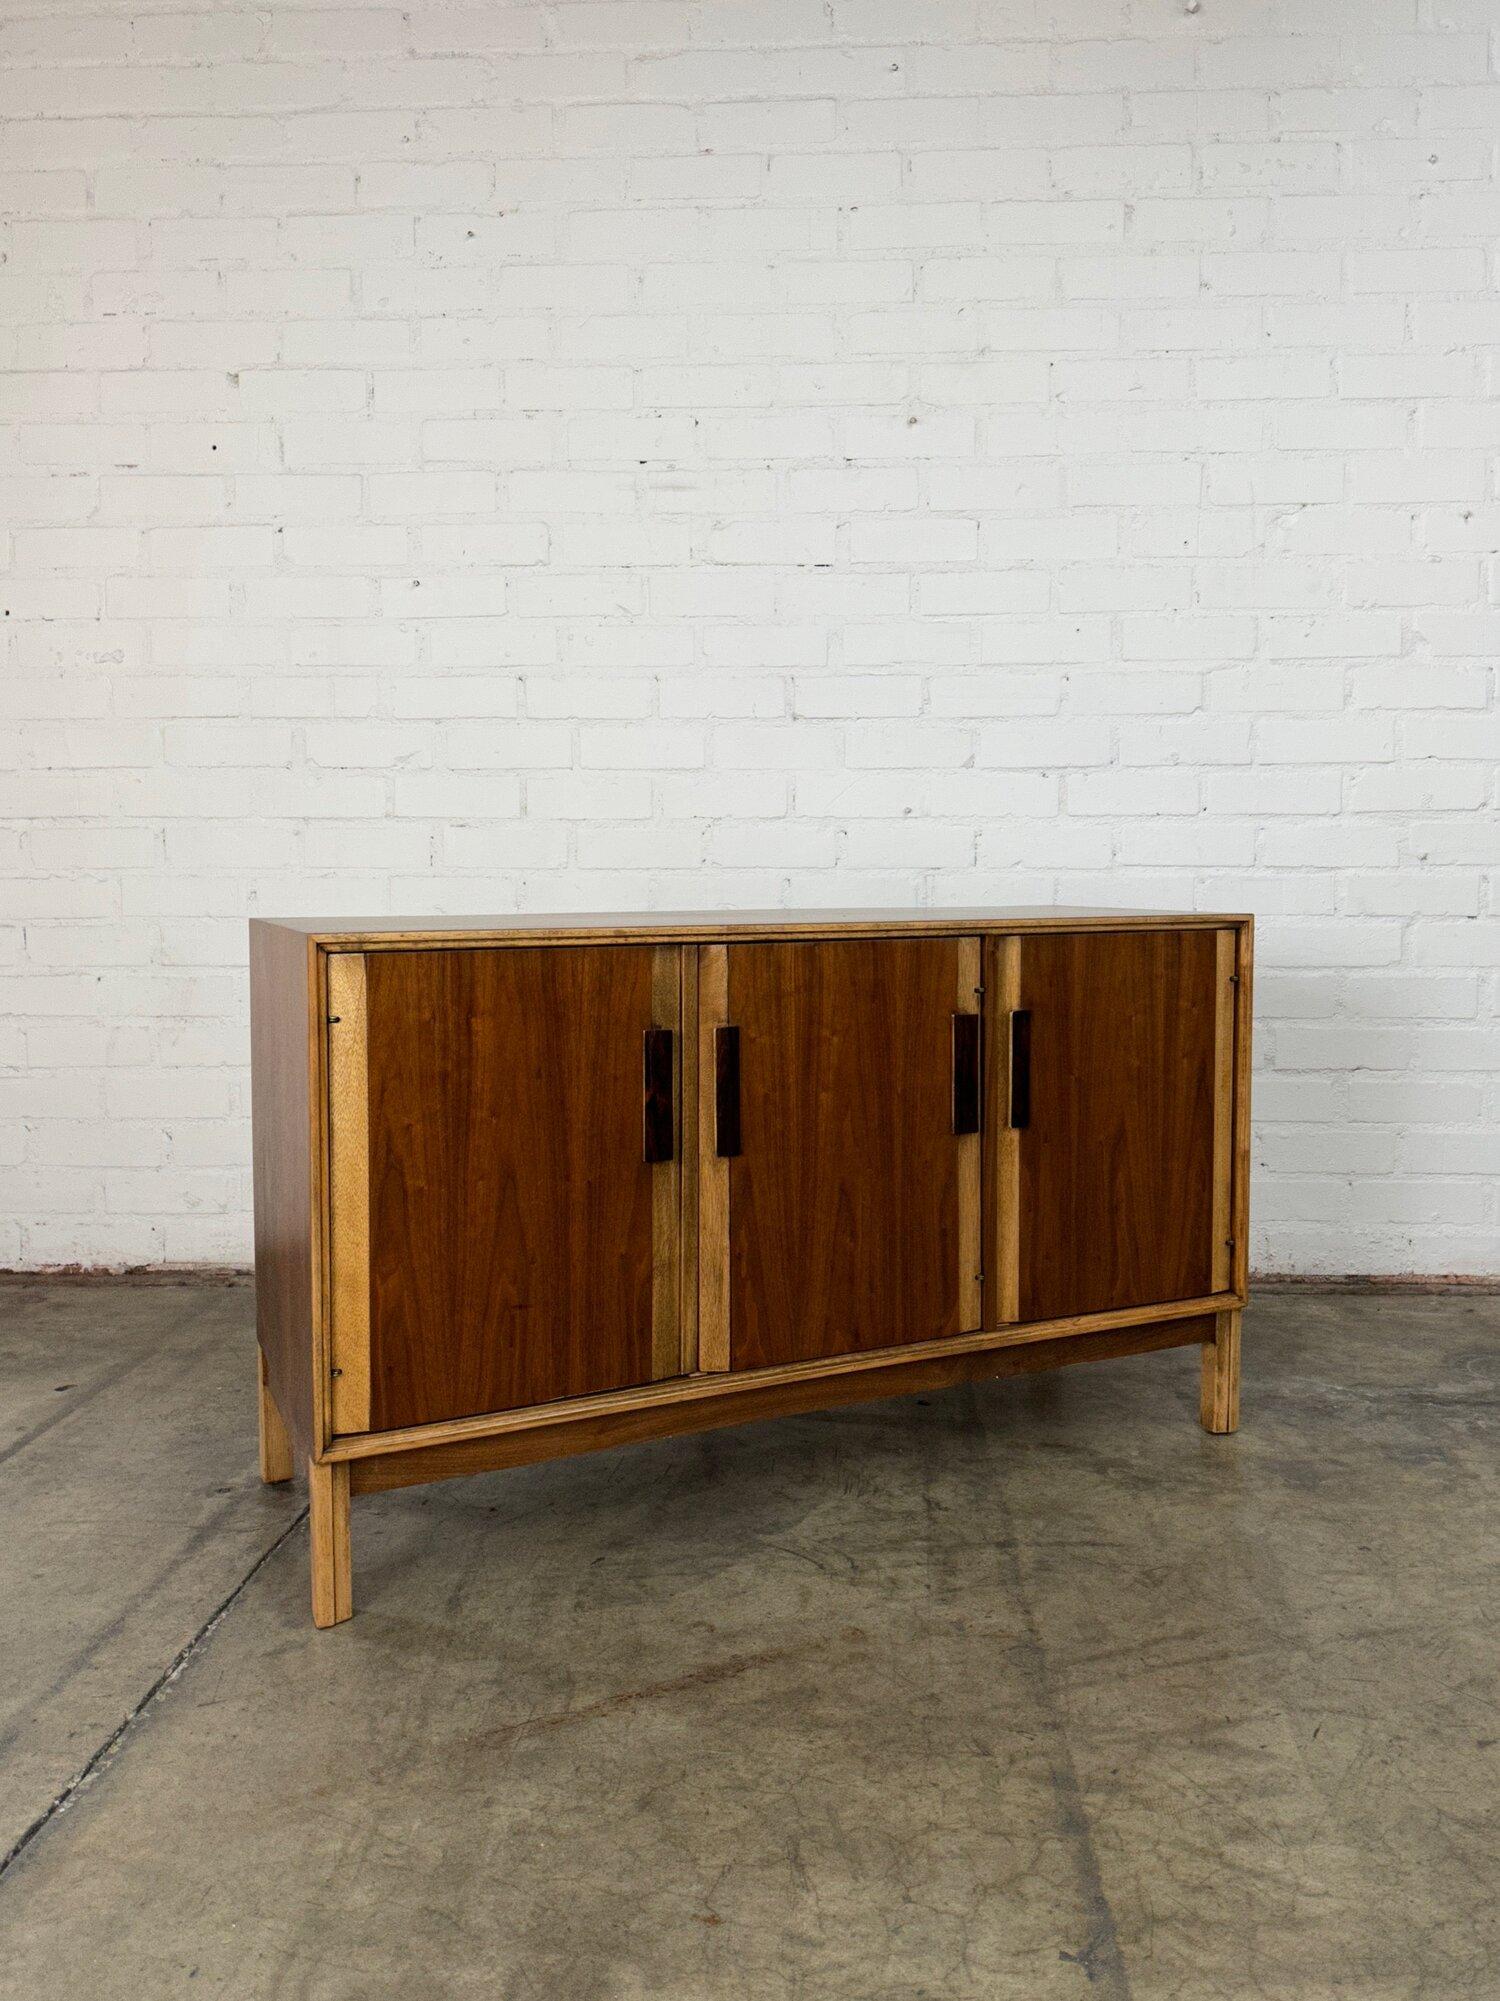 W52 D19 H30

Fully restored walnut and oak credenza with rosewood sculpted handles. Item is structurally sound , sturdy and fully functional. Manufacture mark still shows well. 

